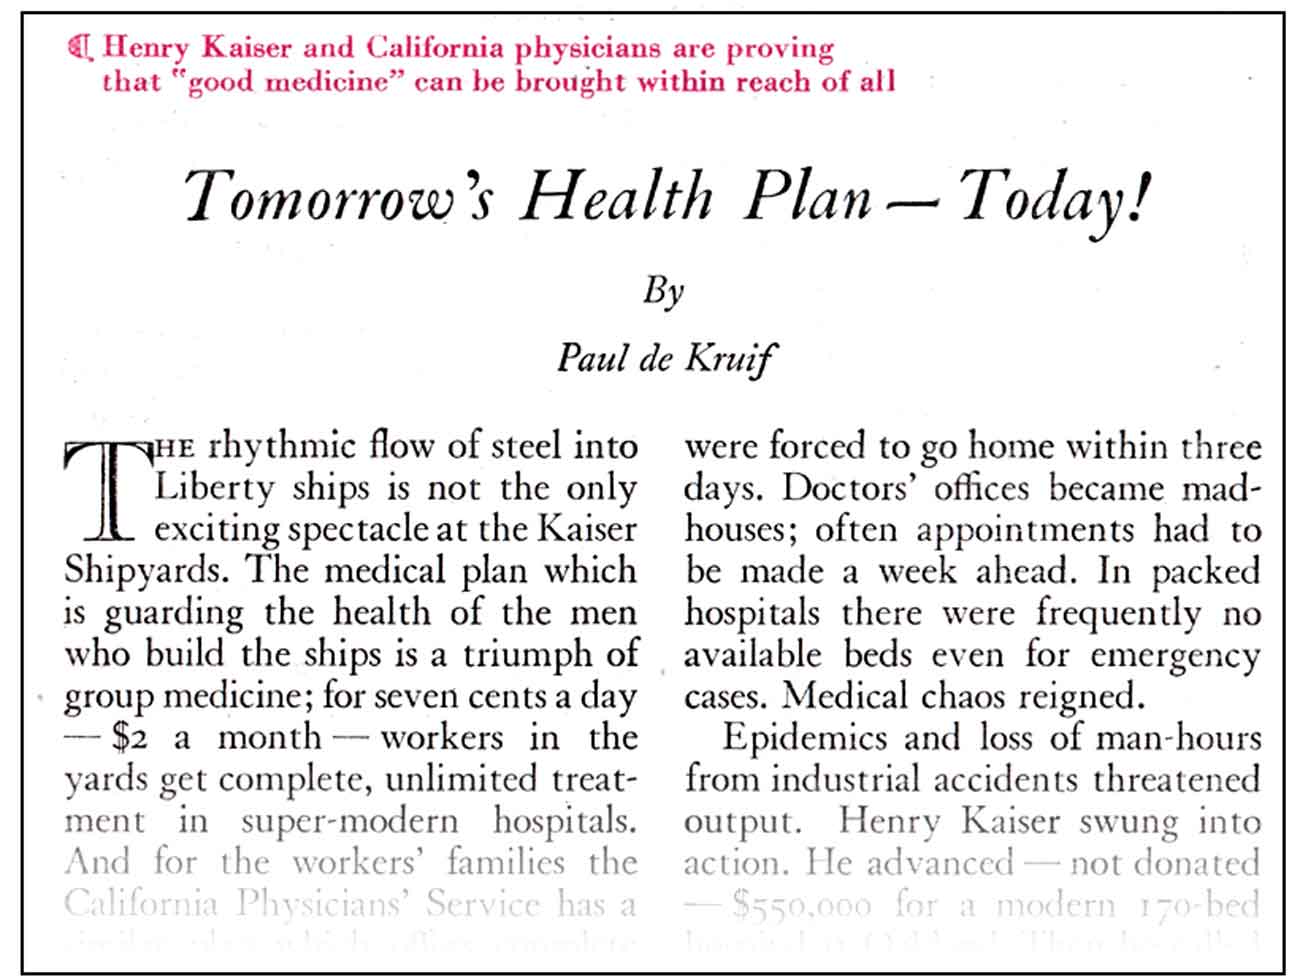 Clipping from Reader's Digest article titled 'Tomorrow’s Health Plan — Today!'